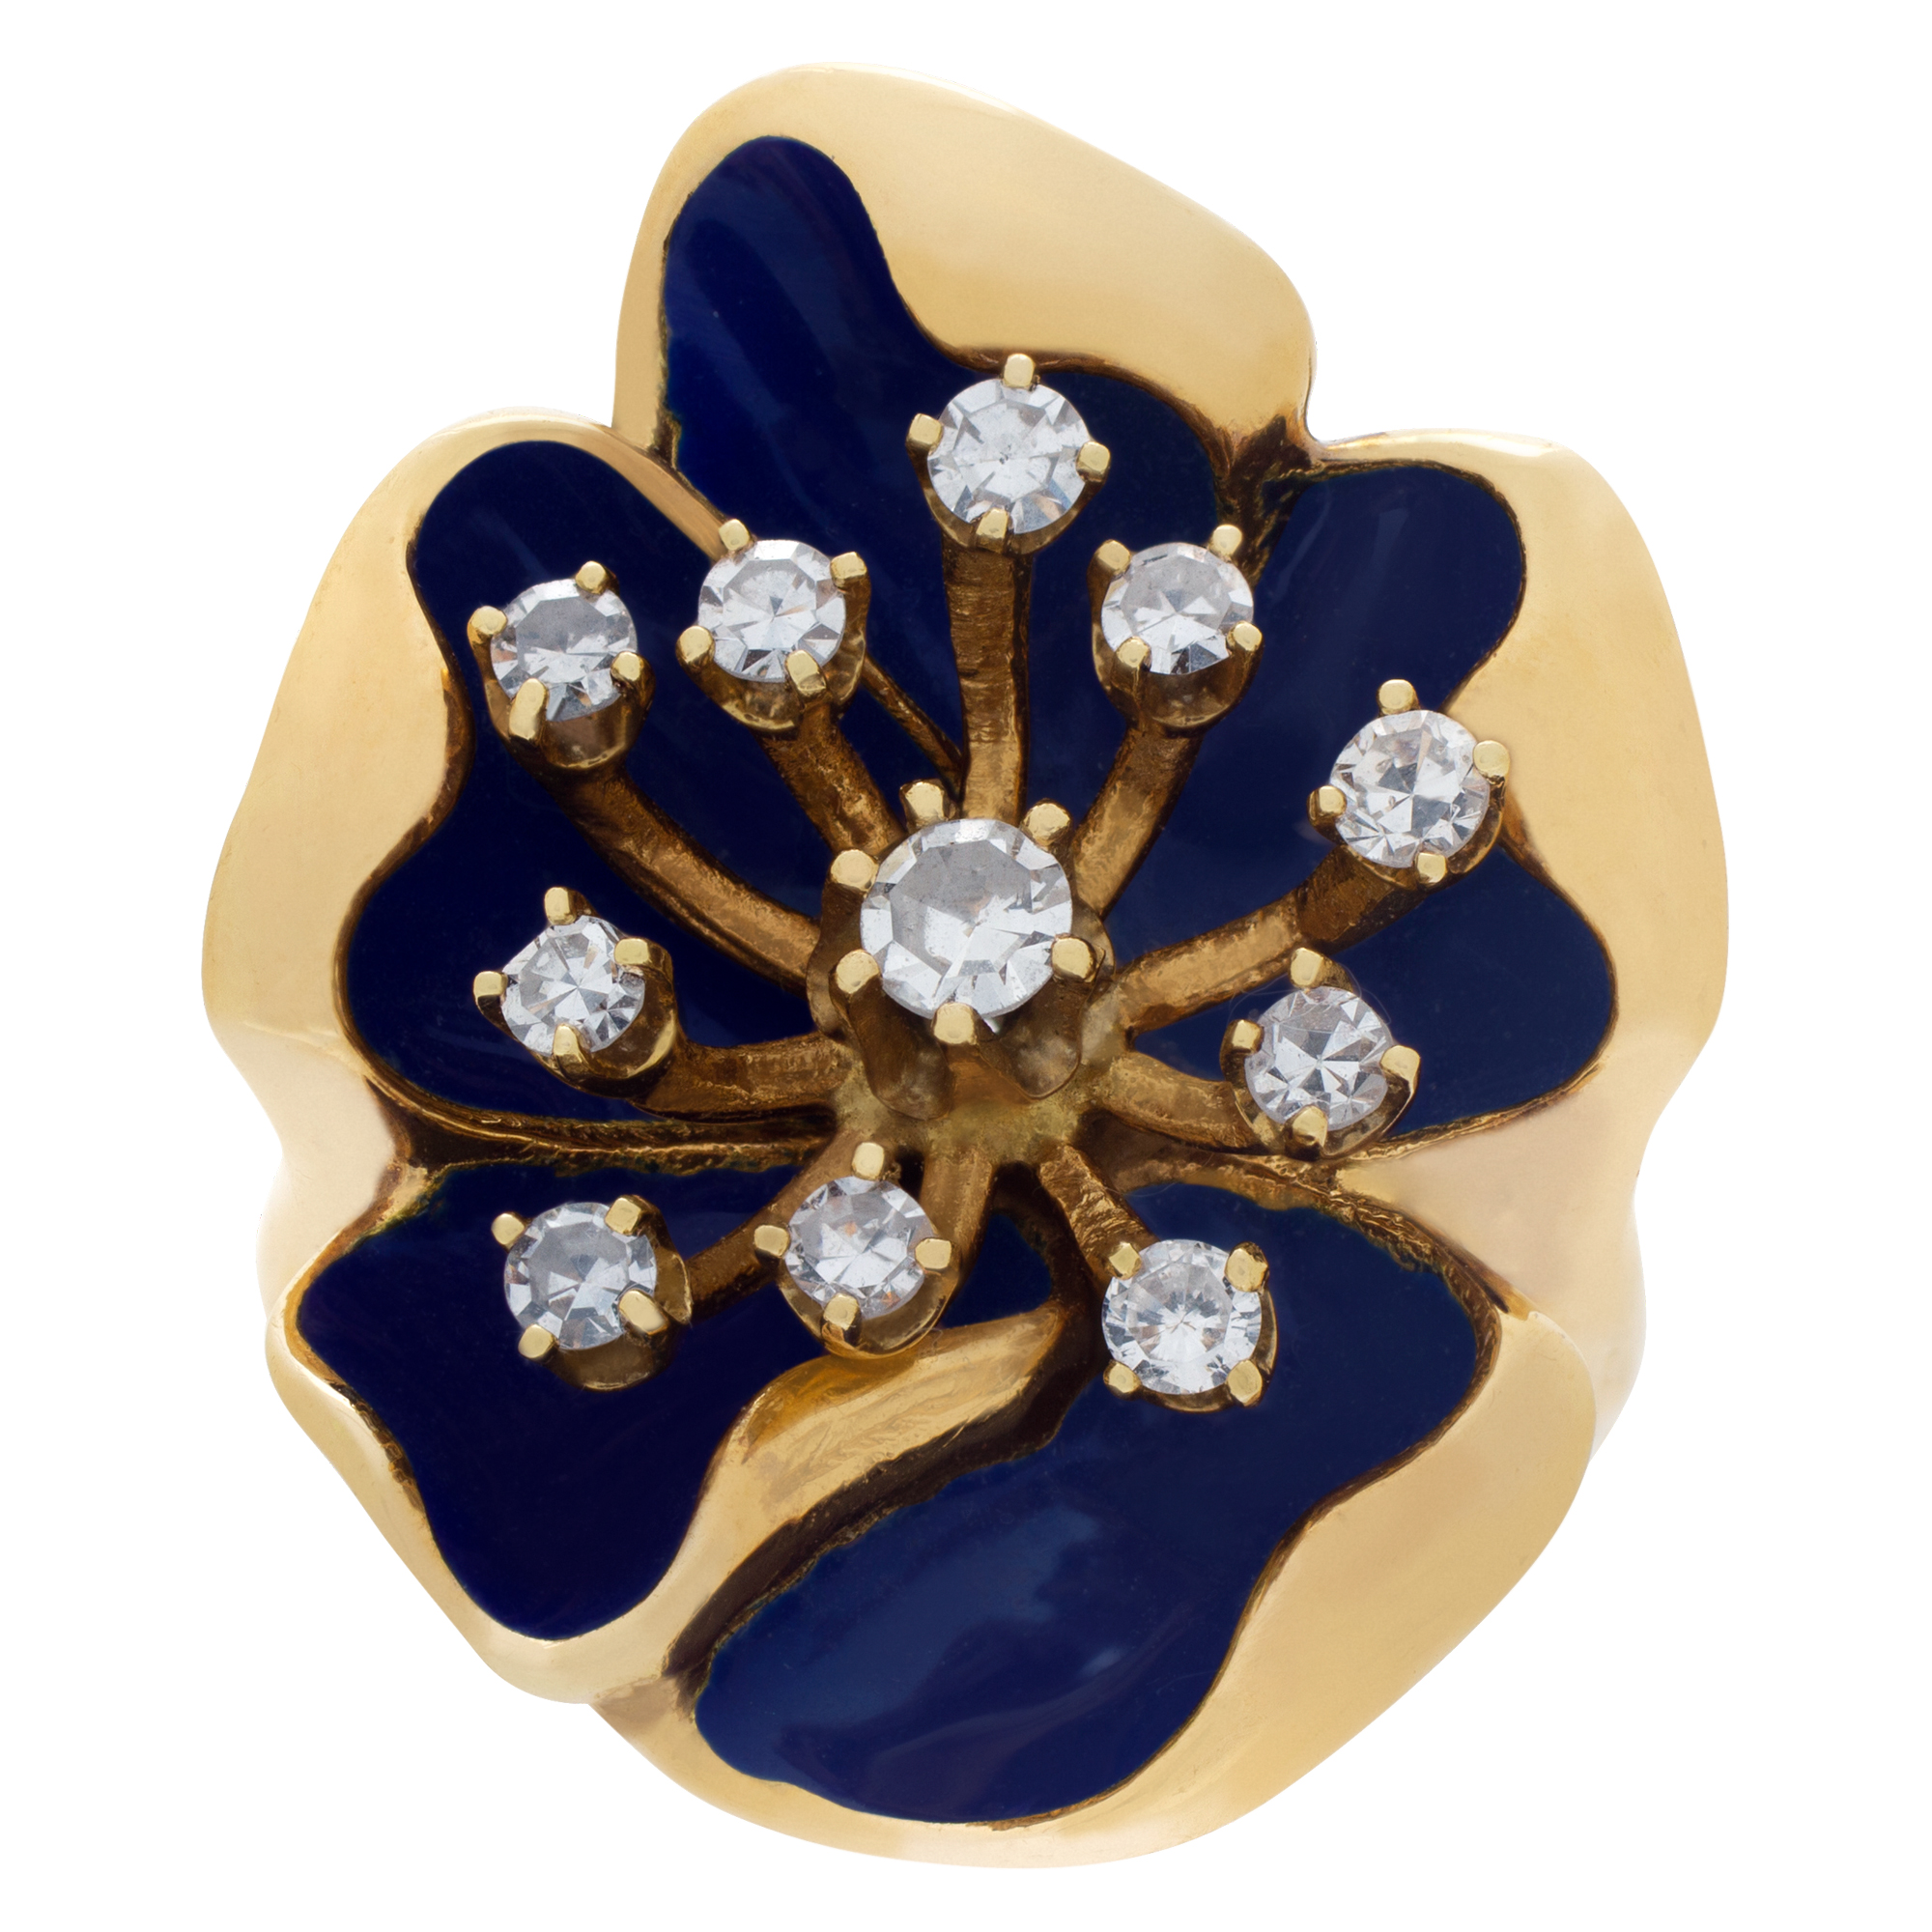 Flower Shape Enamel And Diamond Ring In 14k yellow gold. Size 5.75 image 2